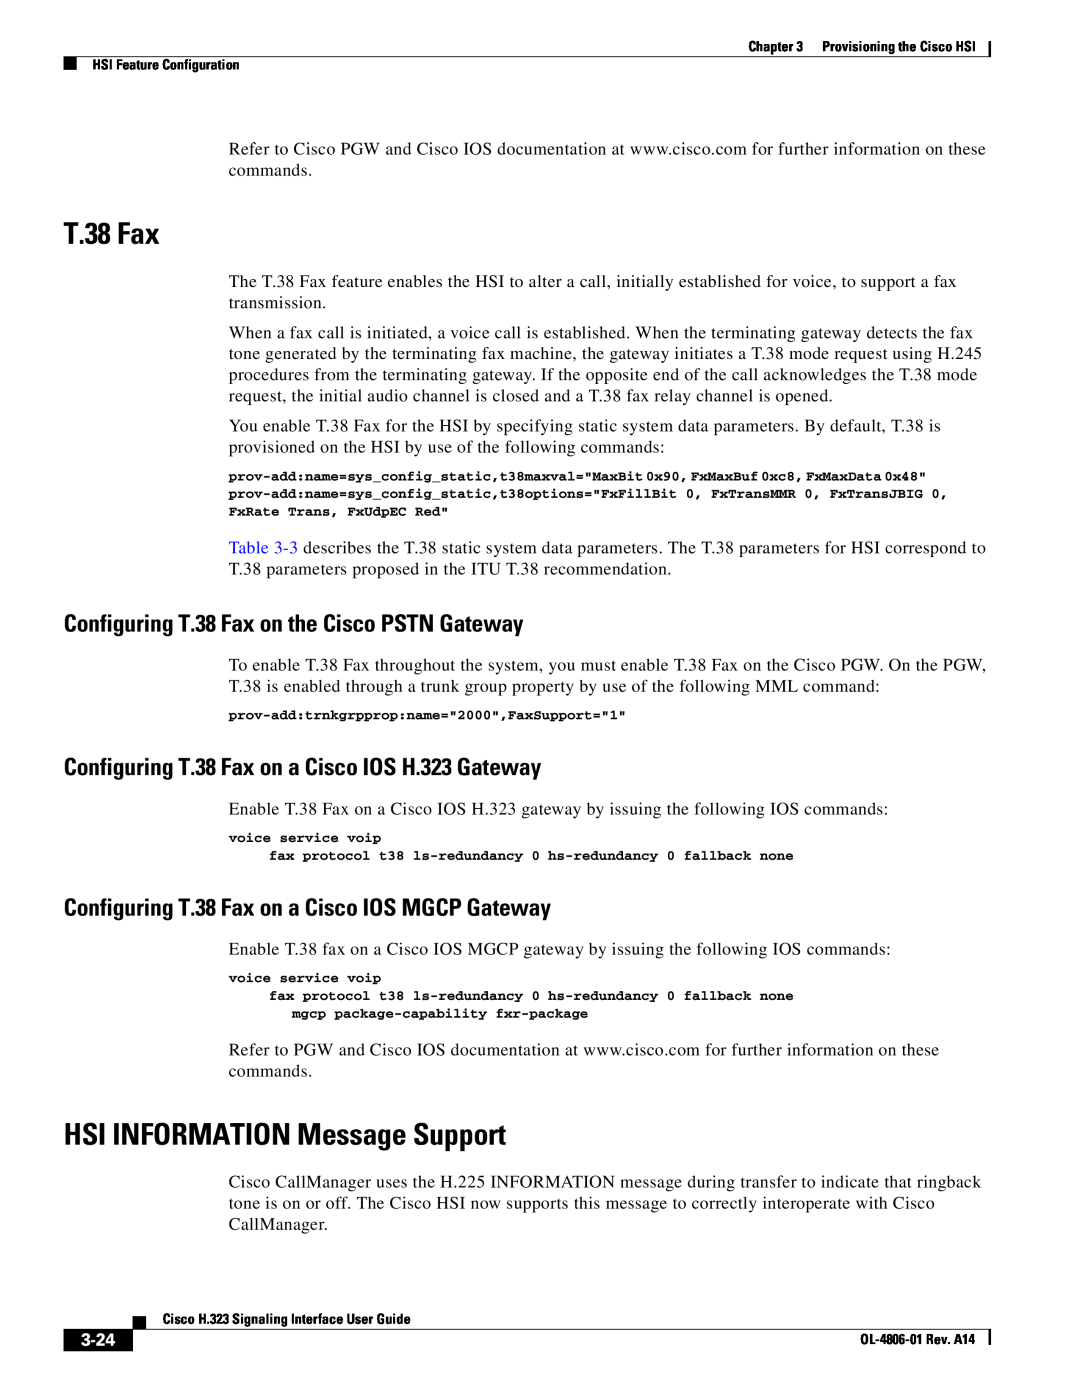 Cisco Systems H.323 appendix HSI INFORMATION Message Support, Configuring T.38 Fax on the Cisco PSTN Gateway, 3-24 